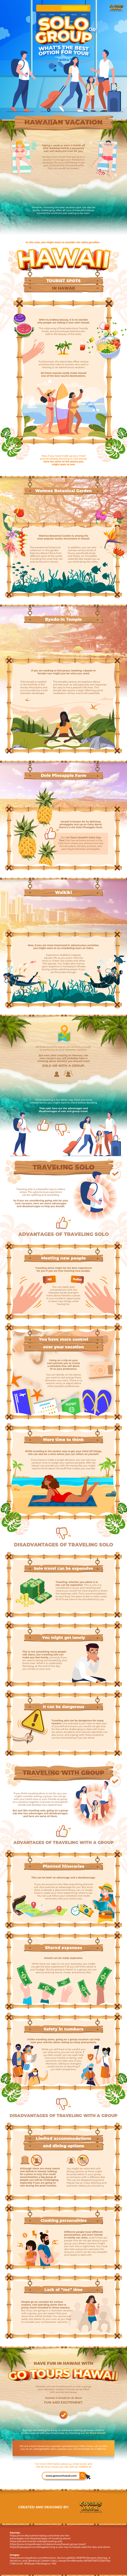 Solo-or-Group-What’s-the-Best-Option-for-your-Hawaiian-Vacation-Infographic-Image-GTHG